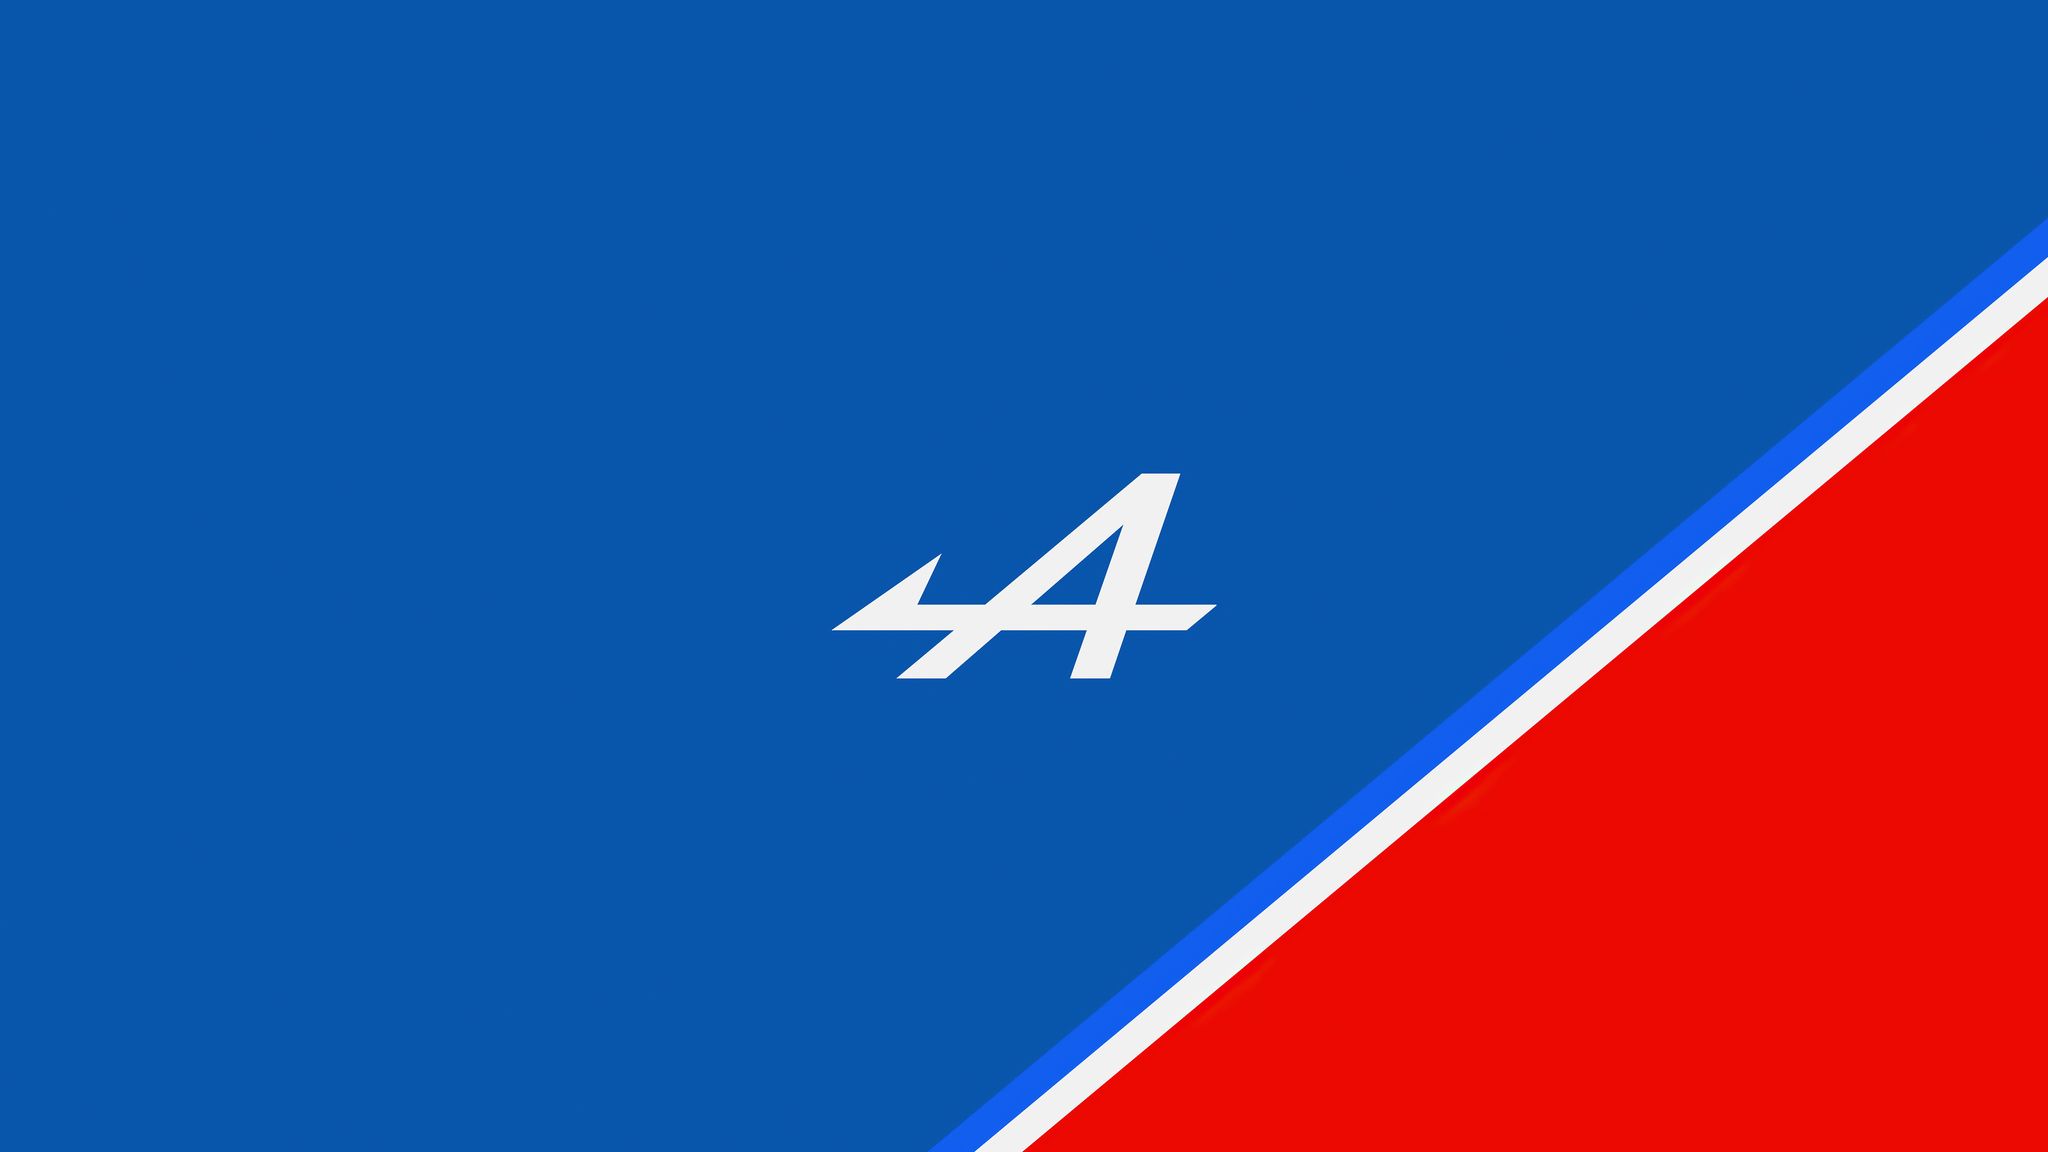 Alpine F1 Logo Minimal 2048x1152 Resolution HD 4k Wallpaper, Image, Background, Photo and Picture